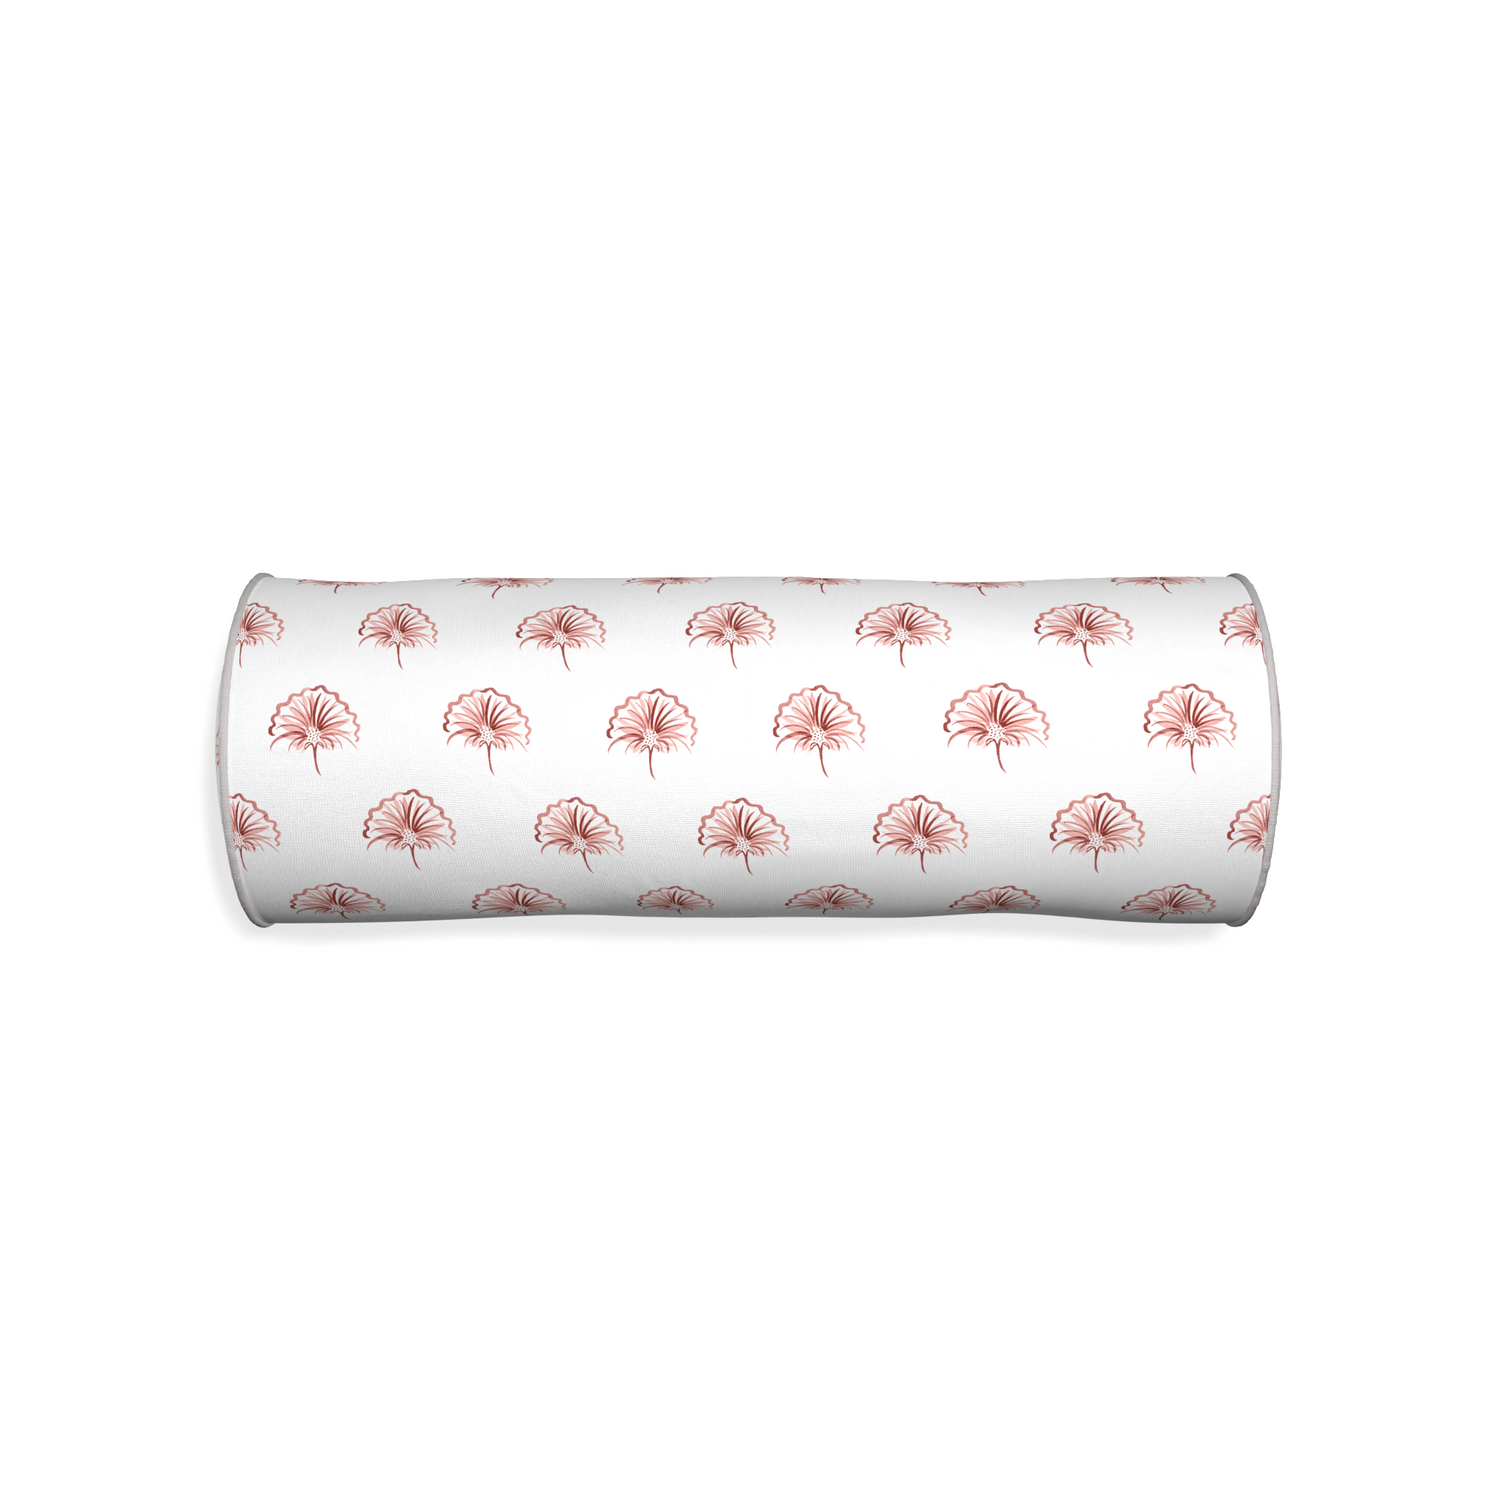 Bolster penelope rose custom pillow with pebble piping on white background